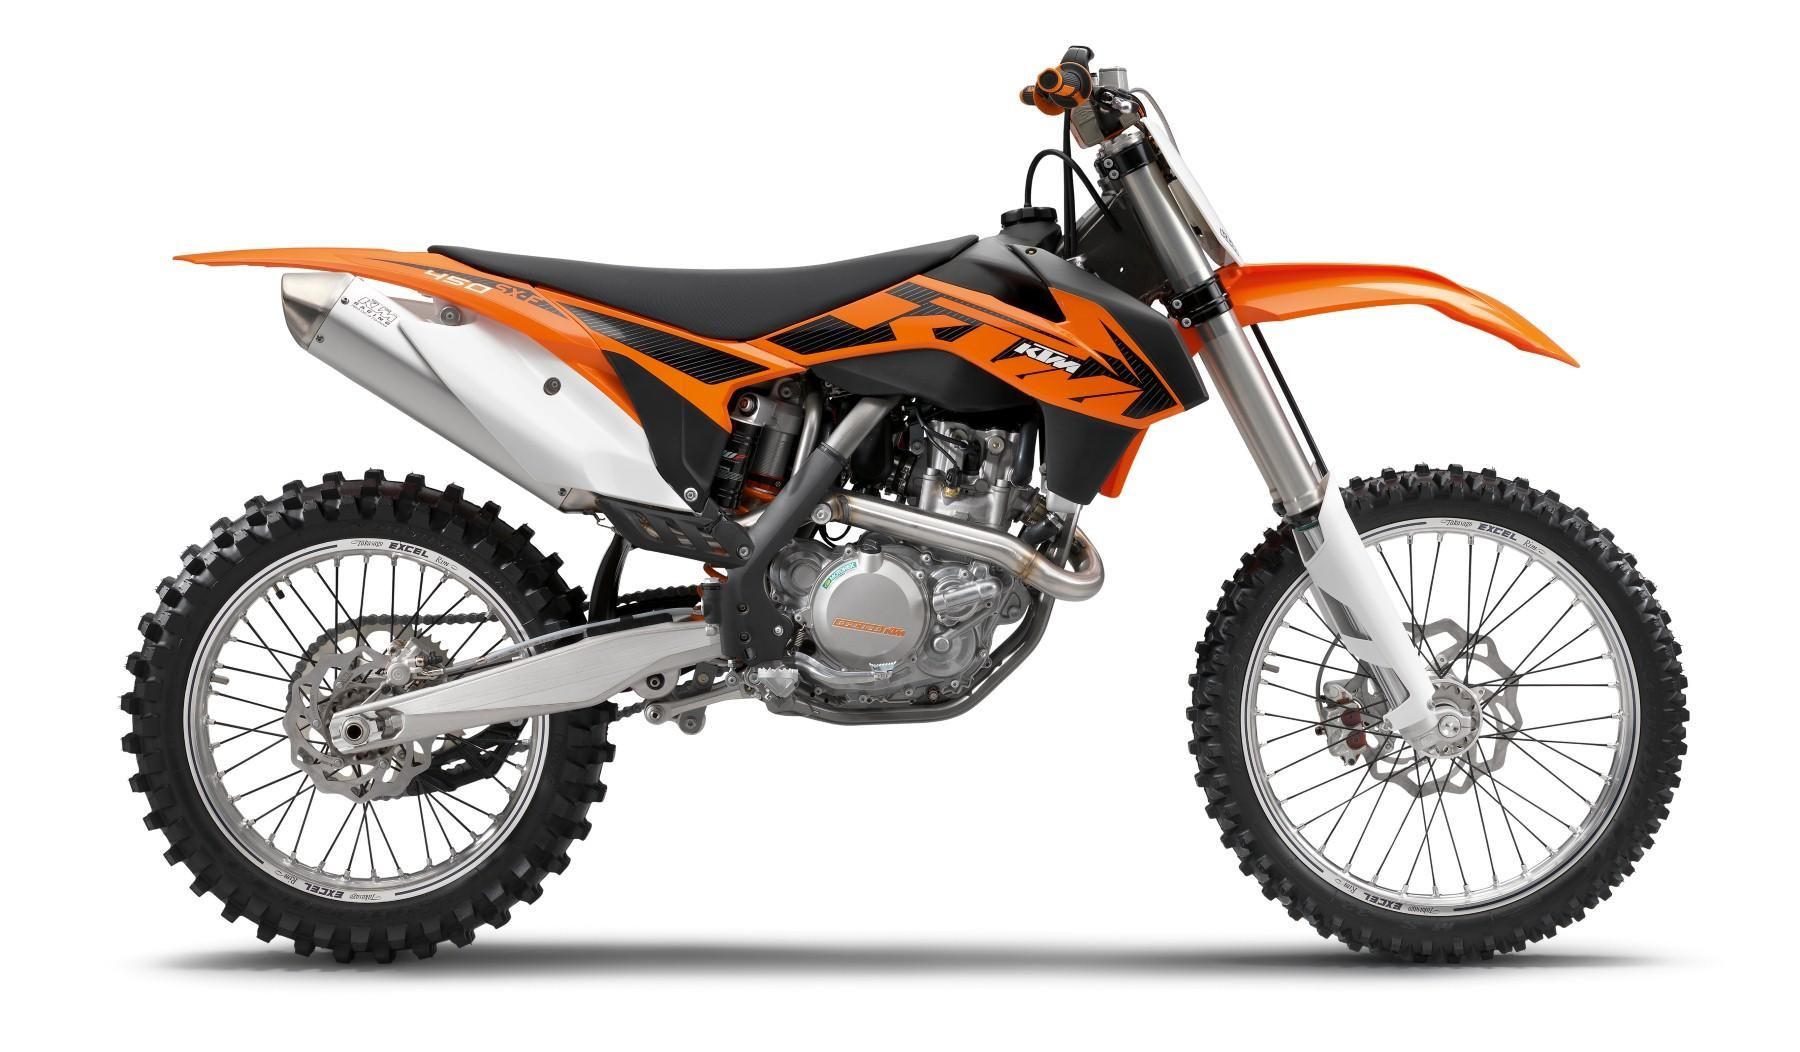 2013 KTM 450 SX-F - right side view